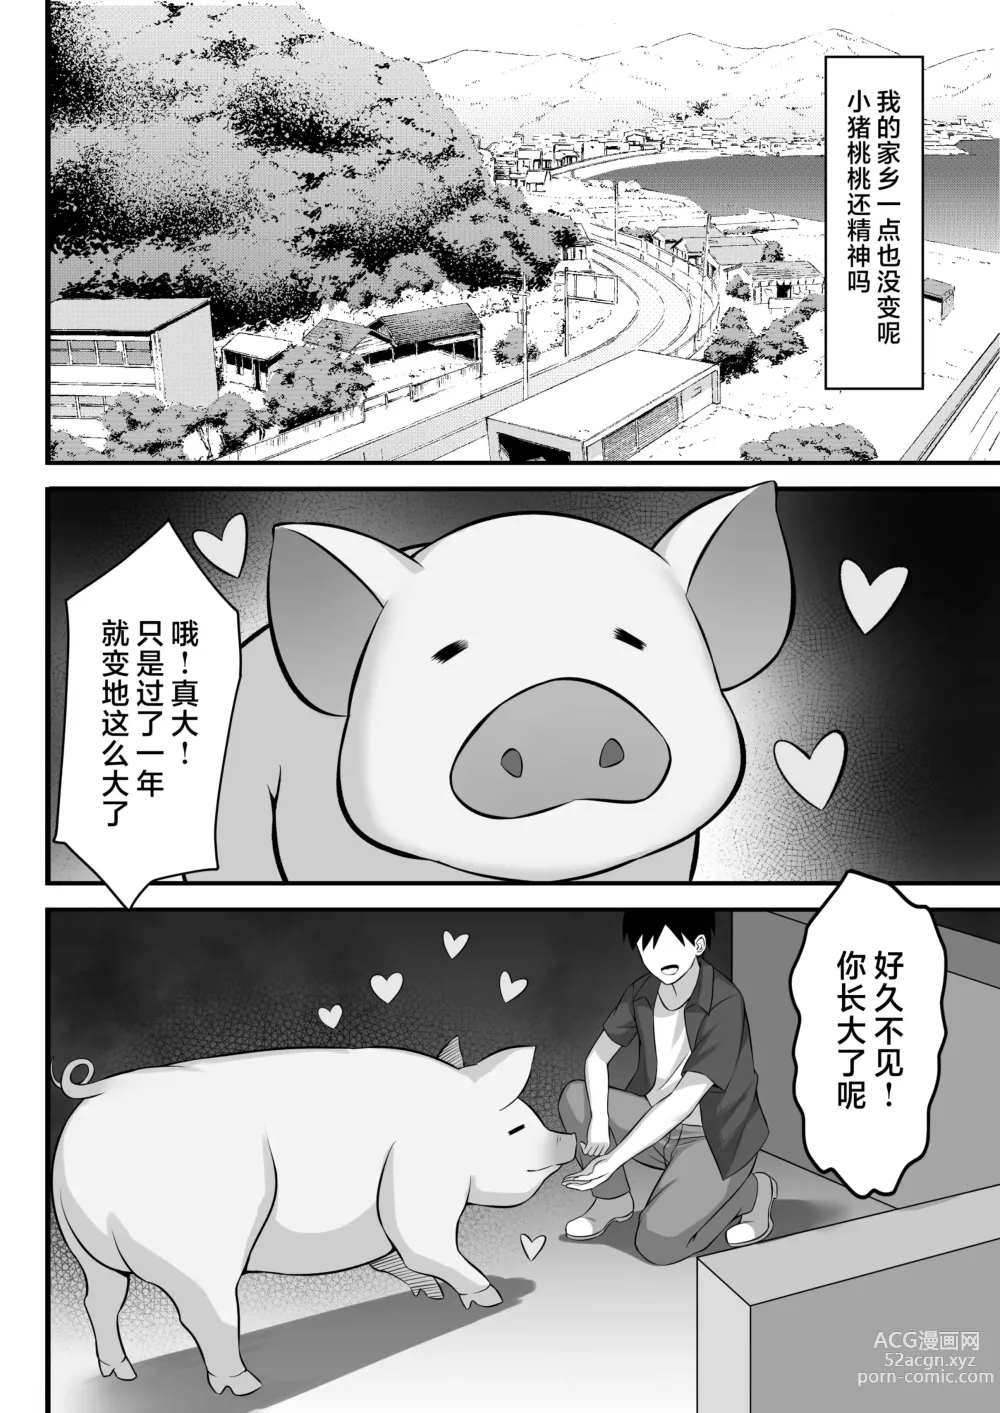 Page 5 of doujinshi 我的上京性生活12 